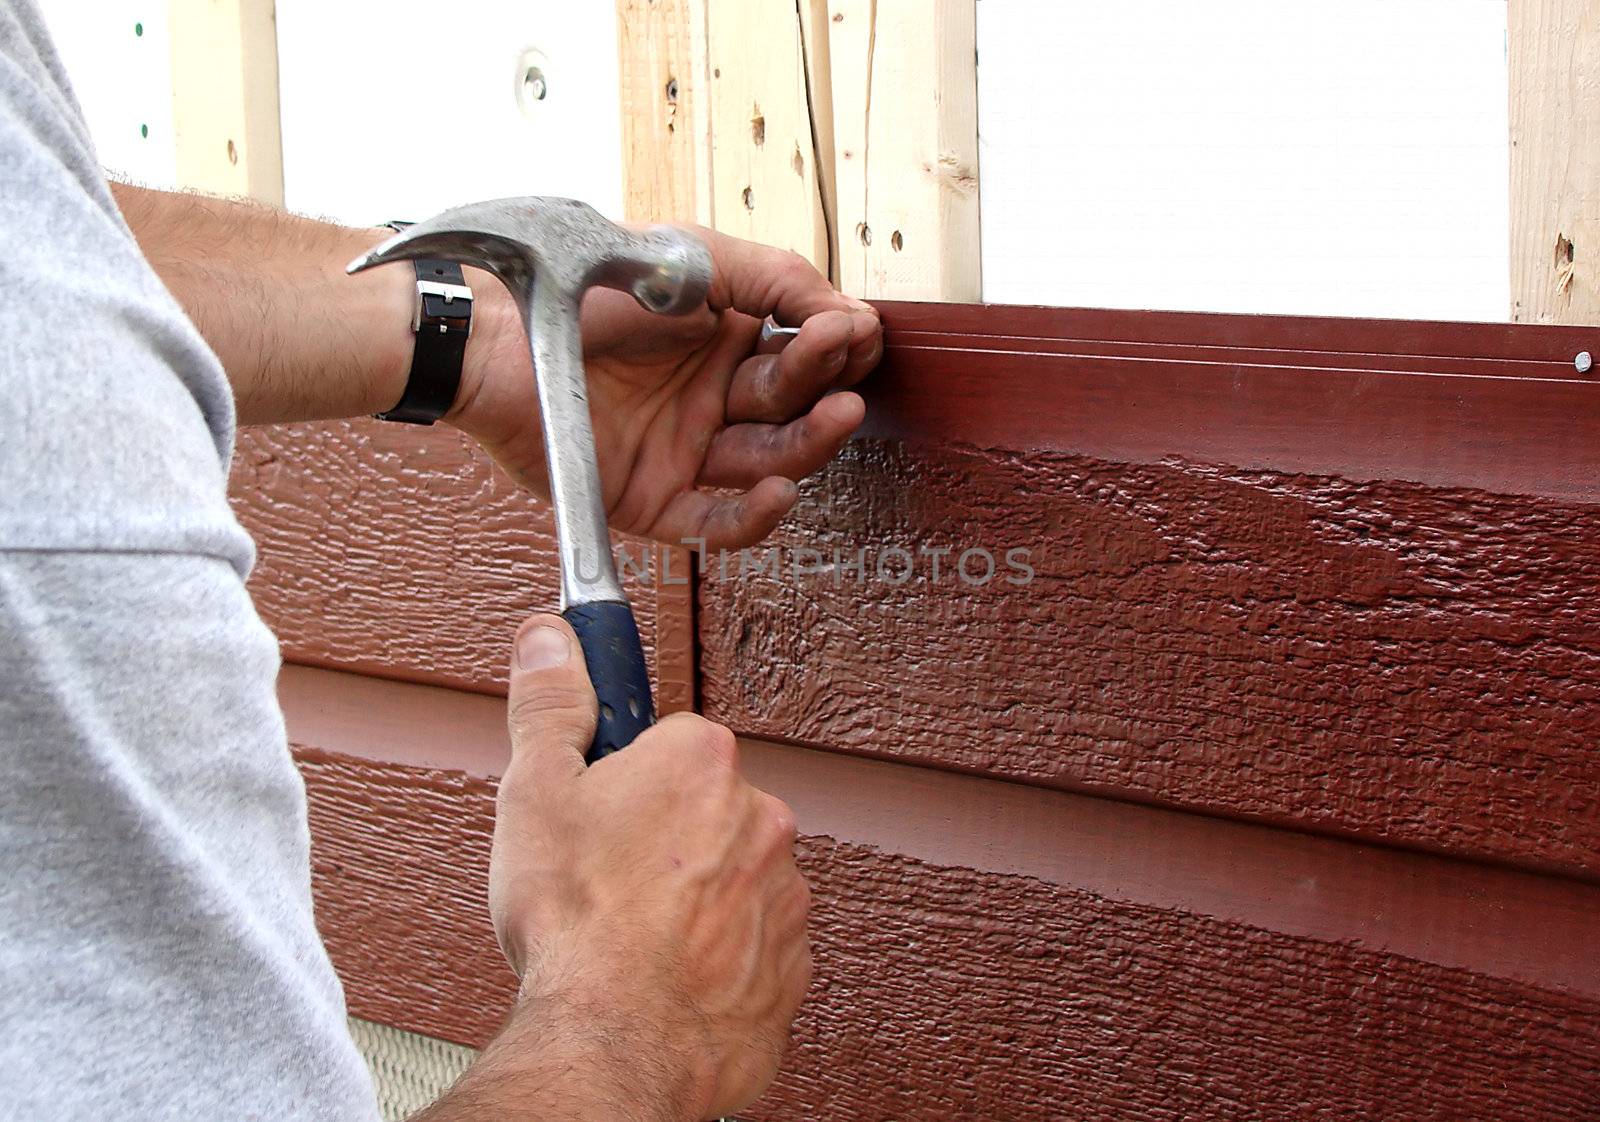 Action shot of a construction worker hammering a nail to put up new siding during major house renovations.